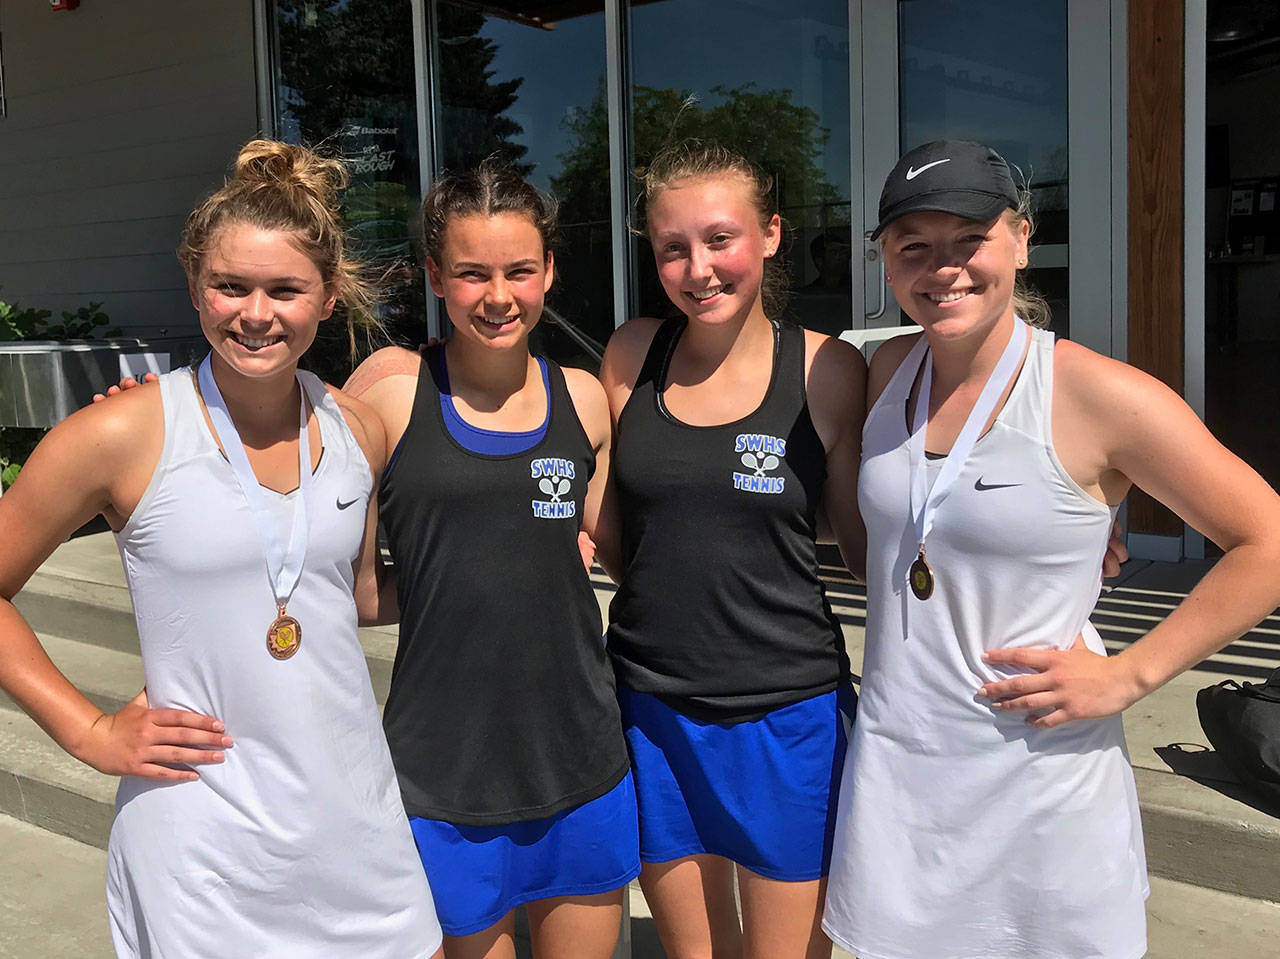 Coupeville’s Payton Aparicio, left, and Sage Renniger, right, pose with South Whidbey’s Alison Papritz, second from left, and Mary Zisette at the state 1A tennis tournament. The Coupeville pair placed fourth in the tournament while the Falcons finished second. (Photo courtesy of Ken Stange)